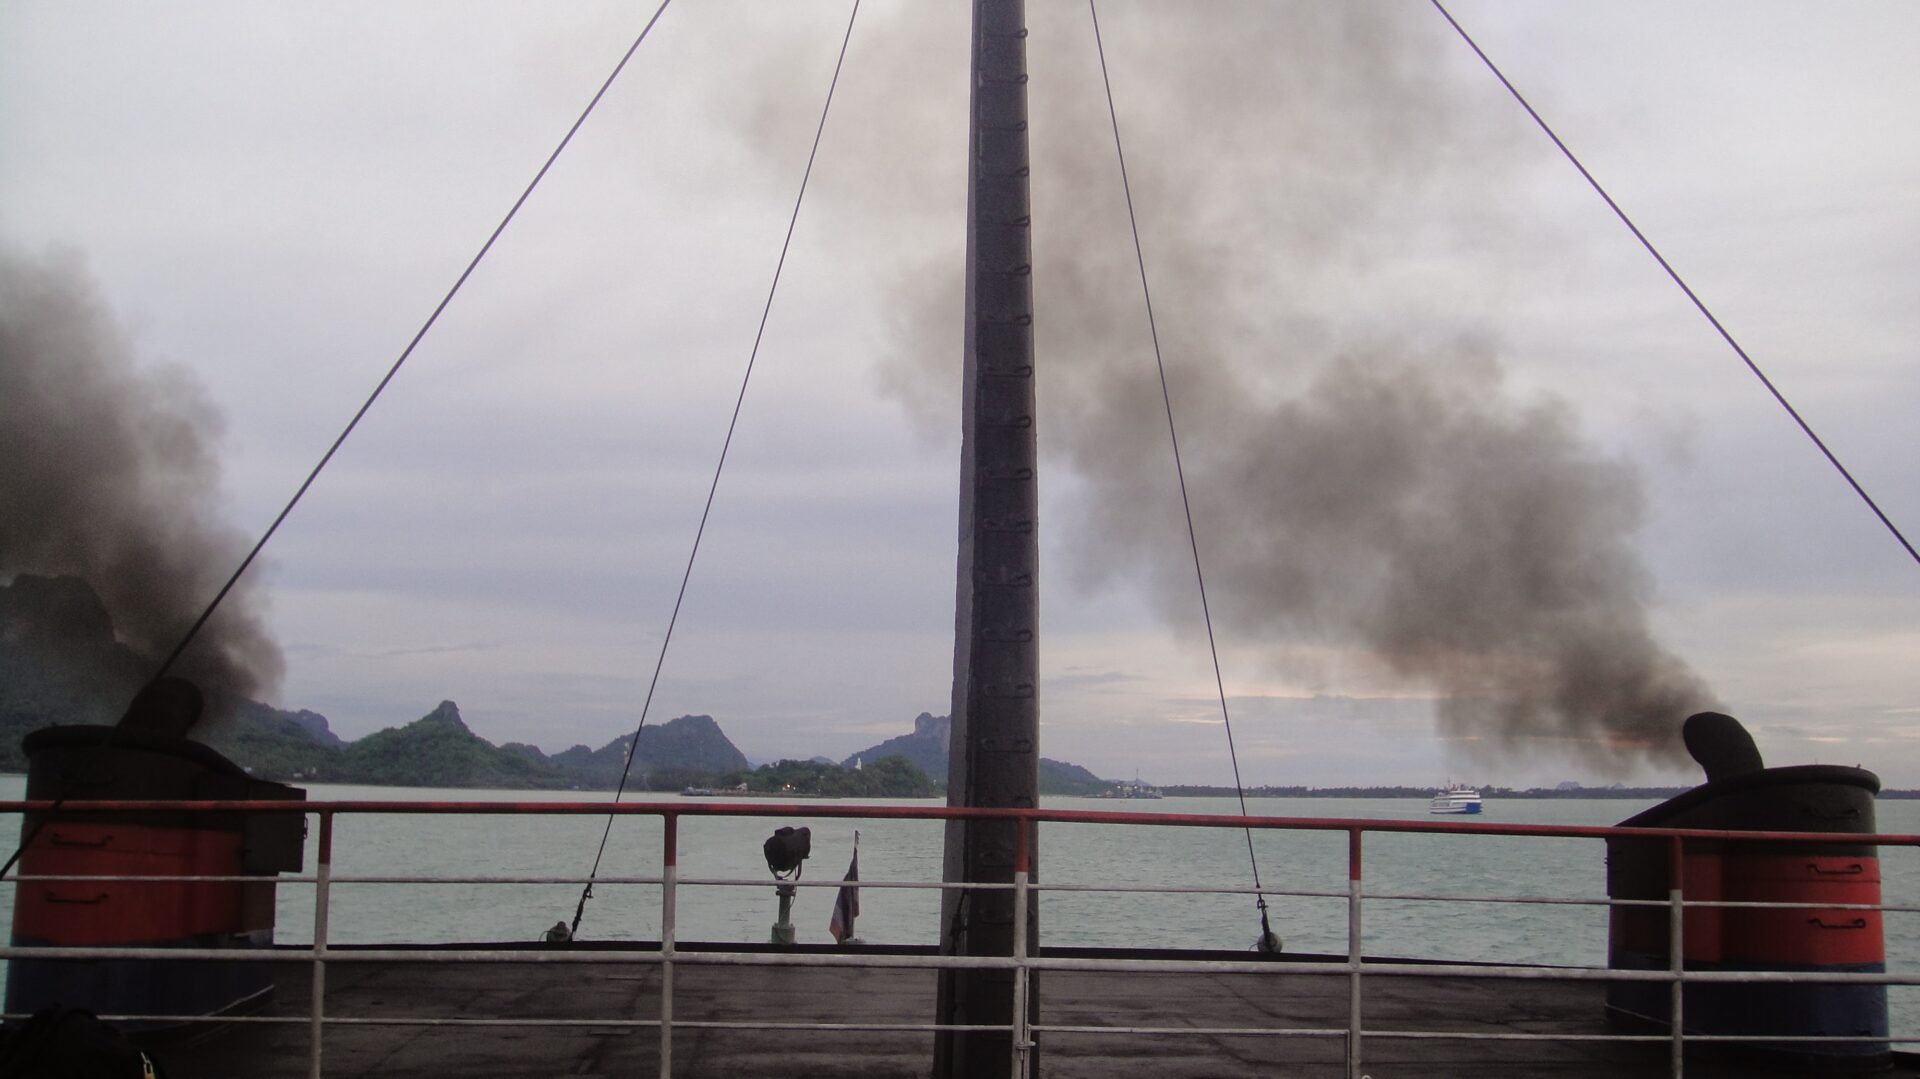 a smoke coming out of a boat